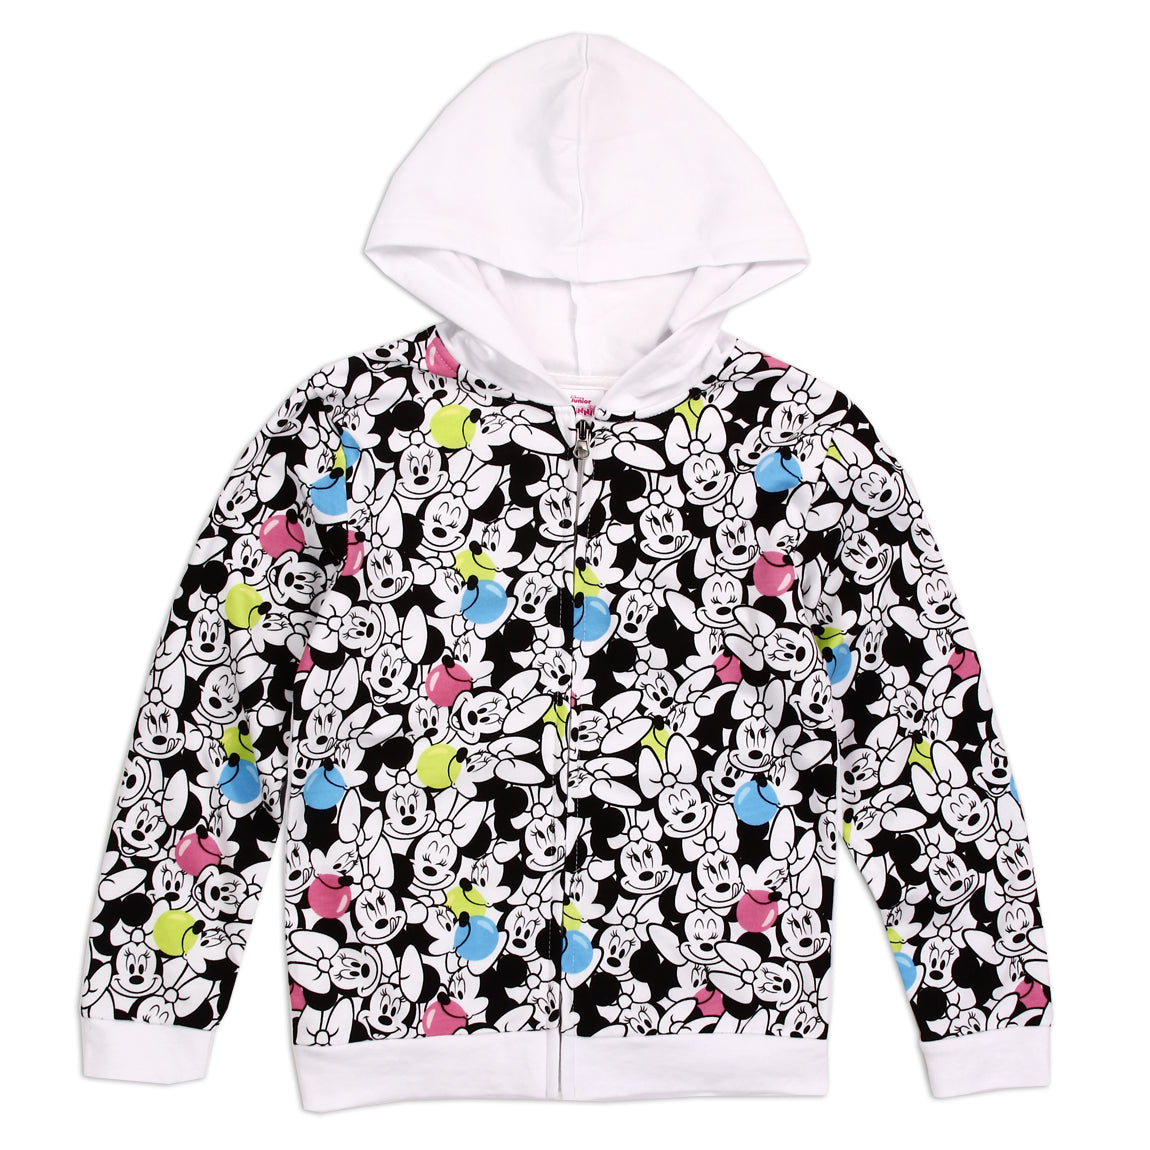 MINNIE MOUSE Girls Toddler Lightweight Zip Up Hoodie (Pack of 6)